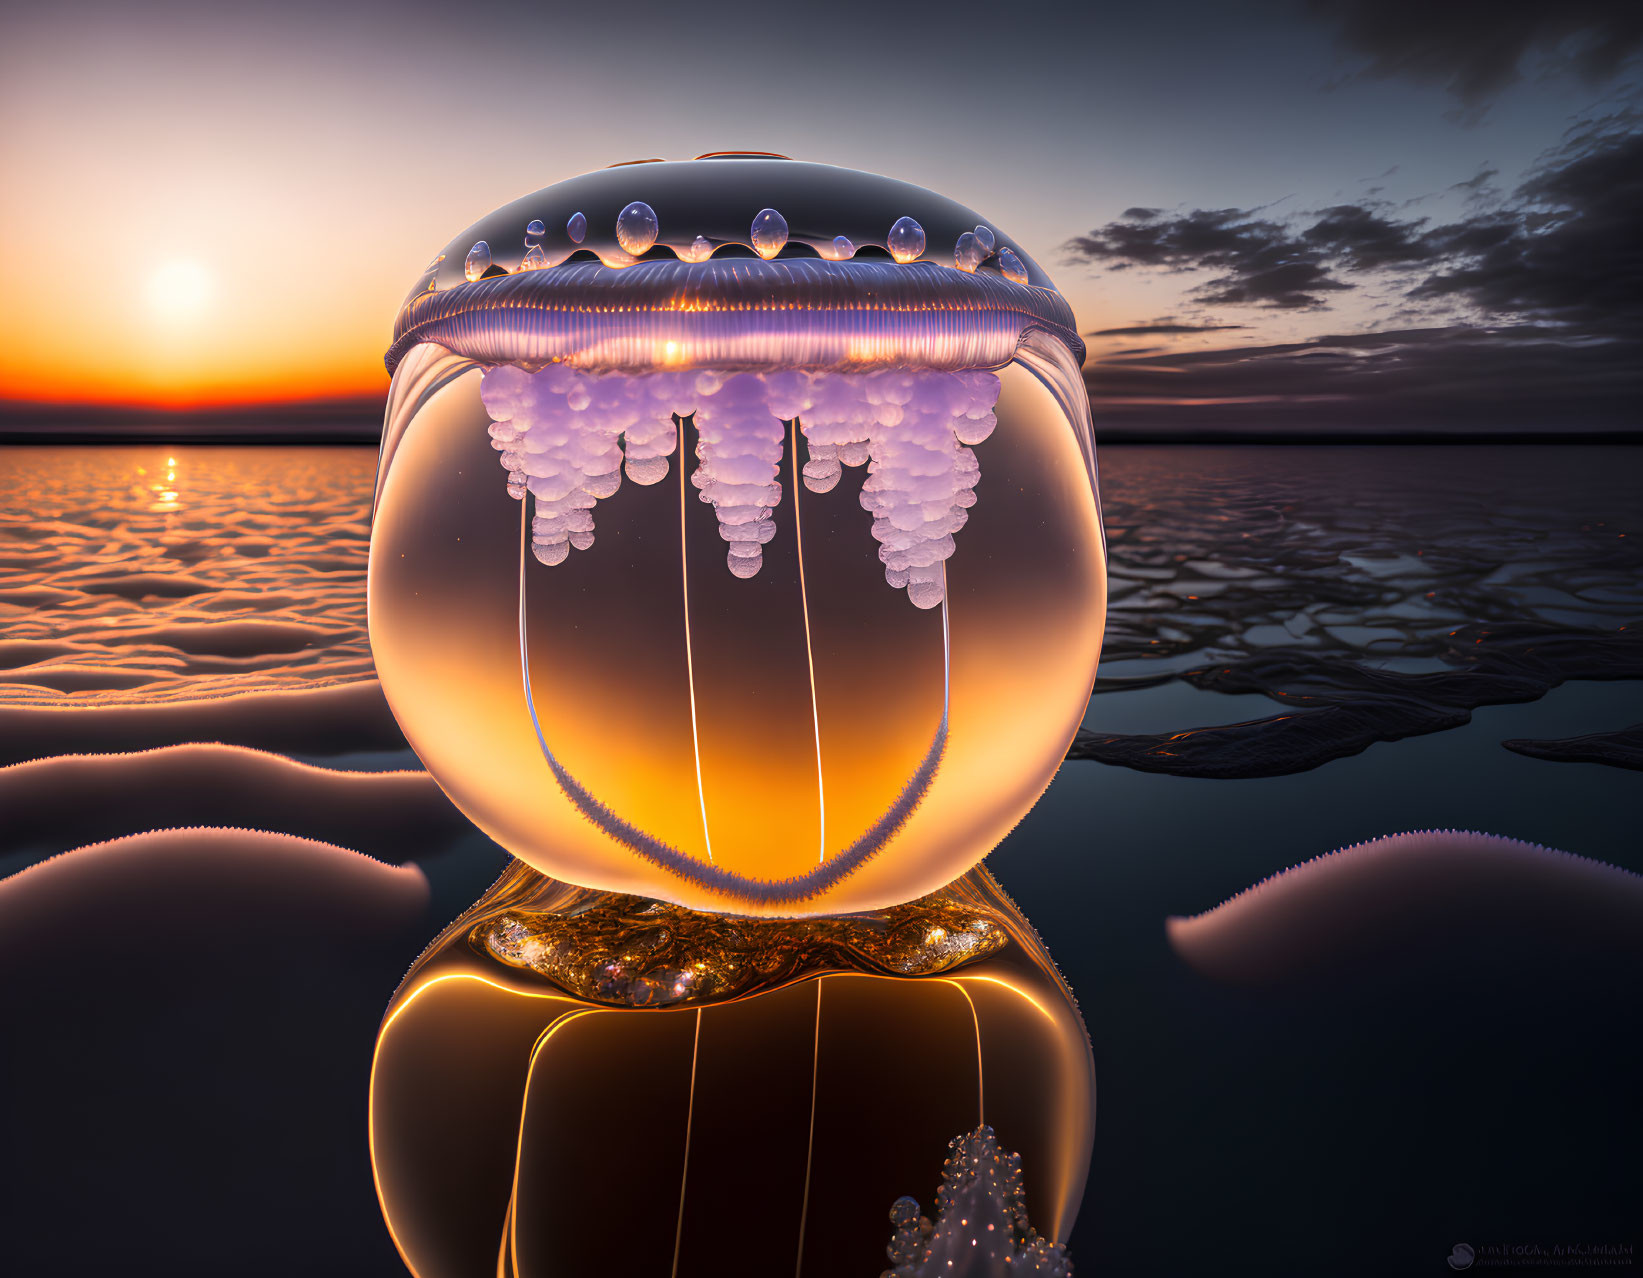 Translucent jellyfish-like sphere with intricate patterns at sunset